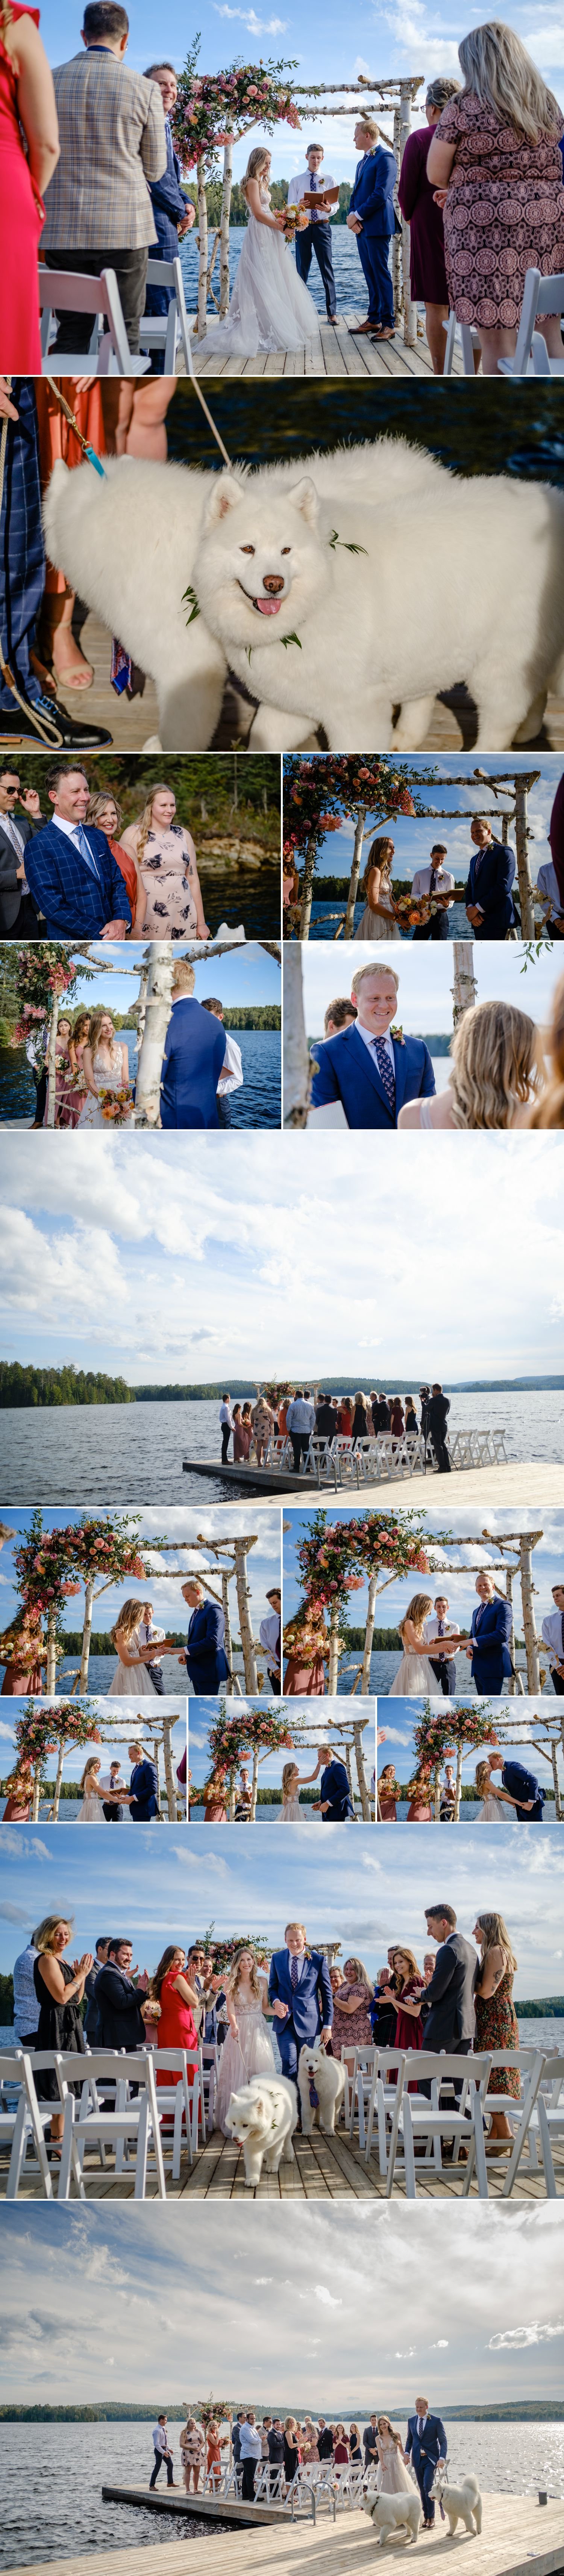 candid moments during an intimate cottage wedding ceremony in calabogie ontario